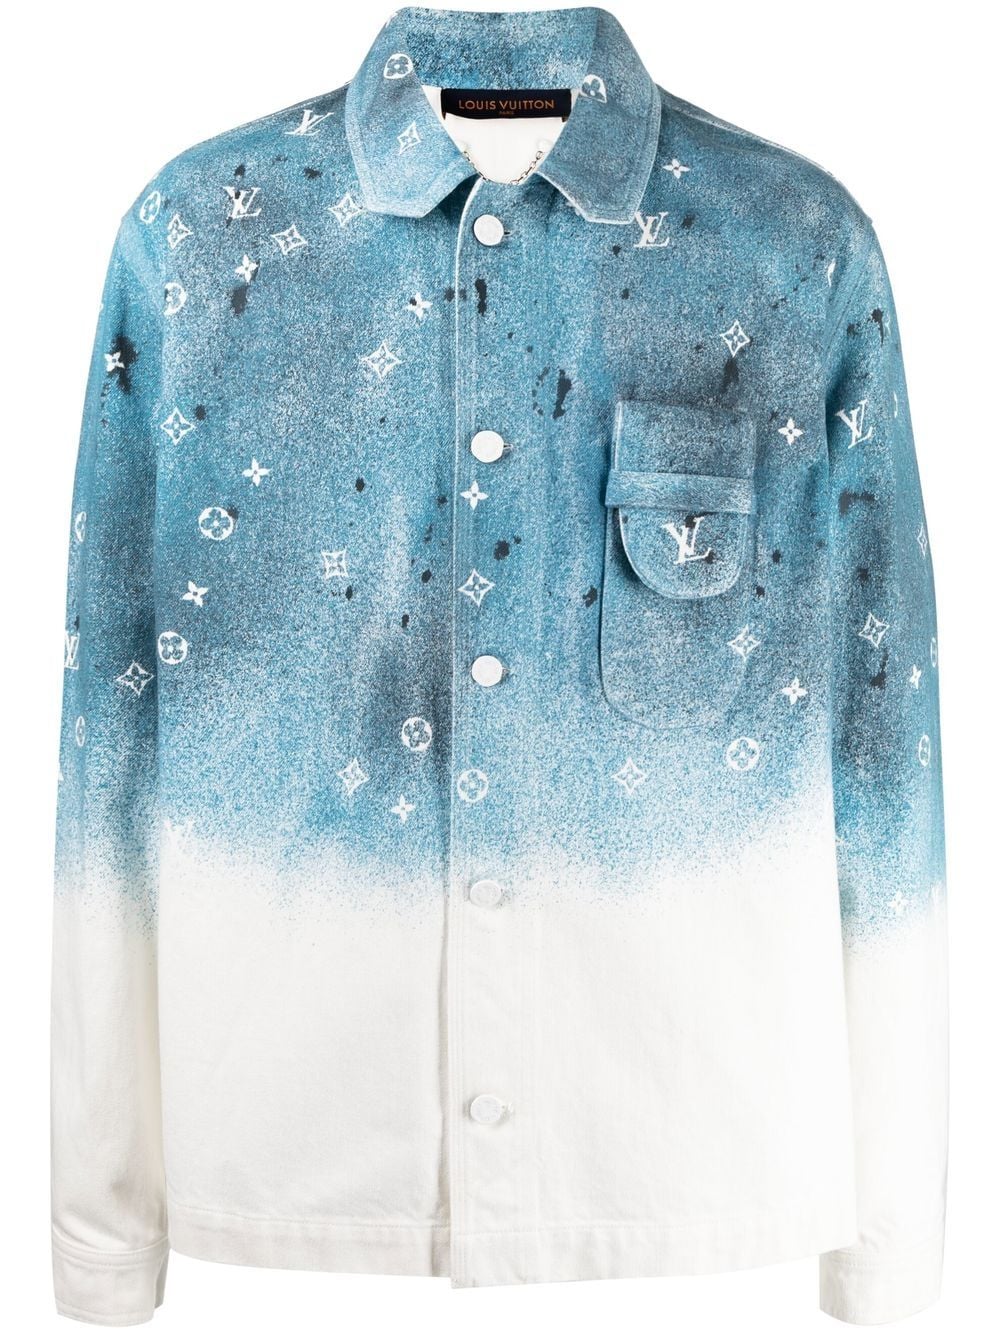 Louis Vuitton 2010 pre-owned Airbrushed Monogram Shirt - Farfetch